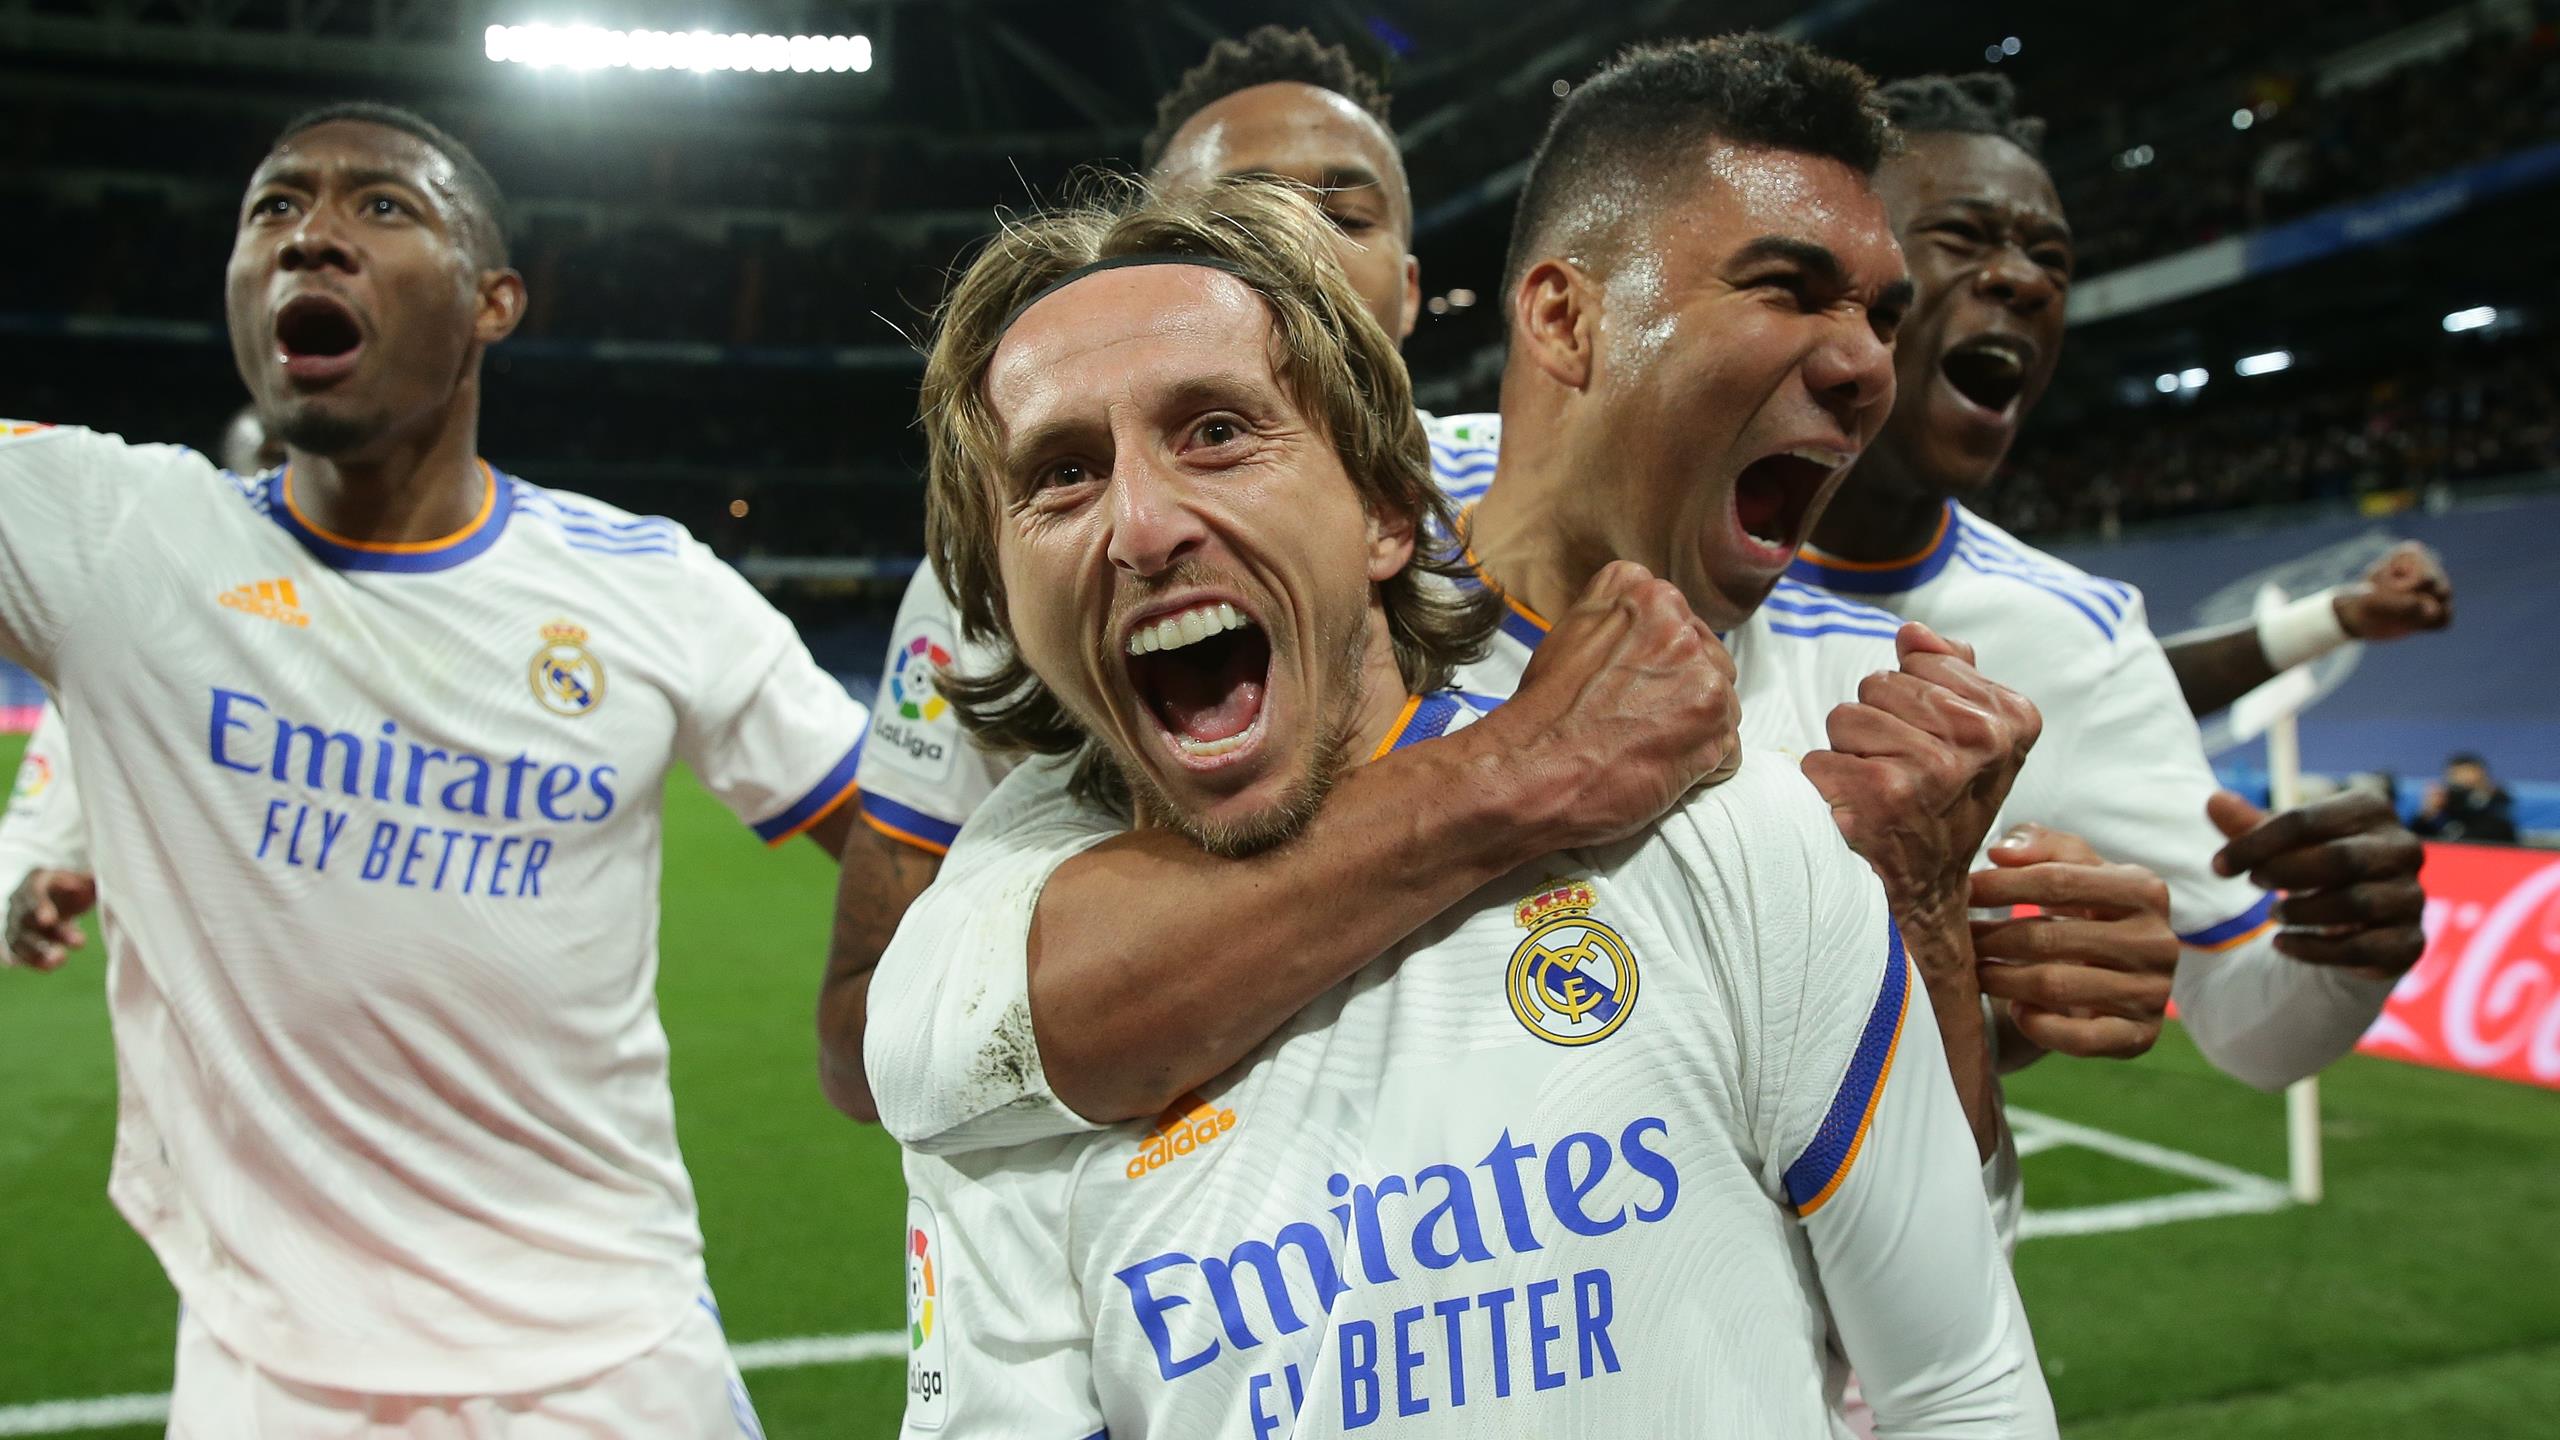 Champions League: All eyes on Luka Modric, Real Madrid's vital cog for PSG clash amid suspensions and injuries